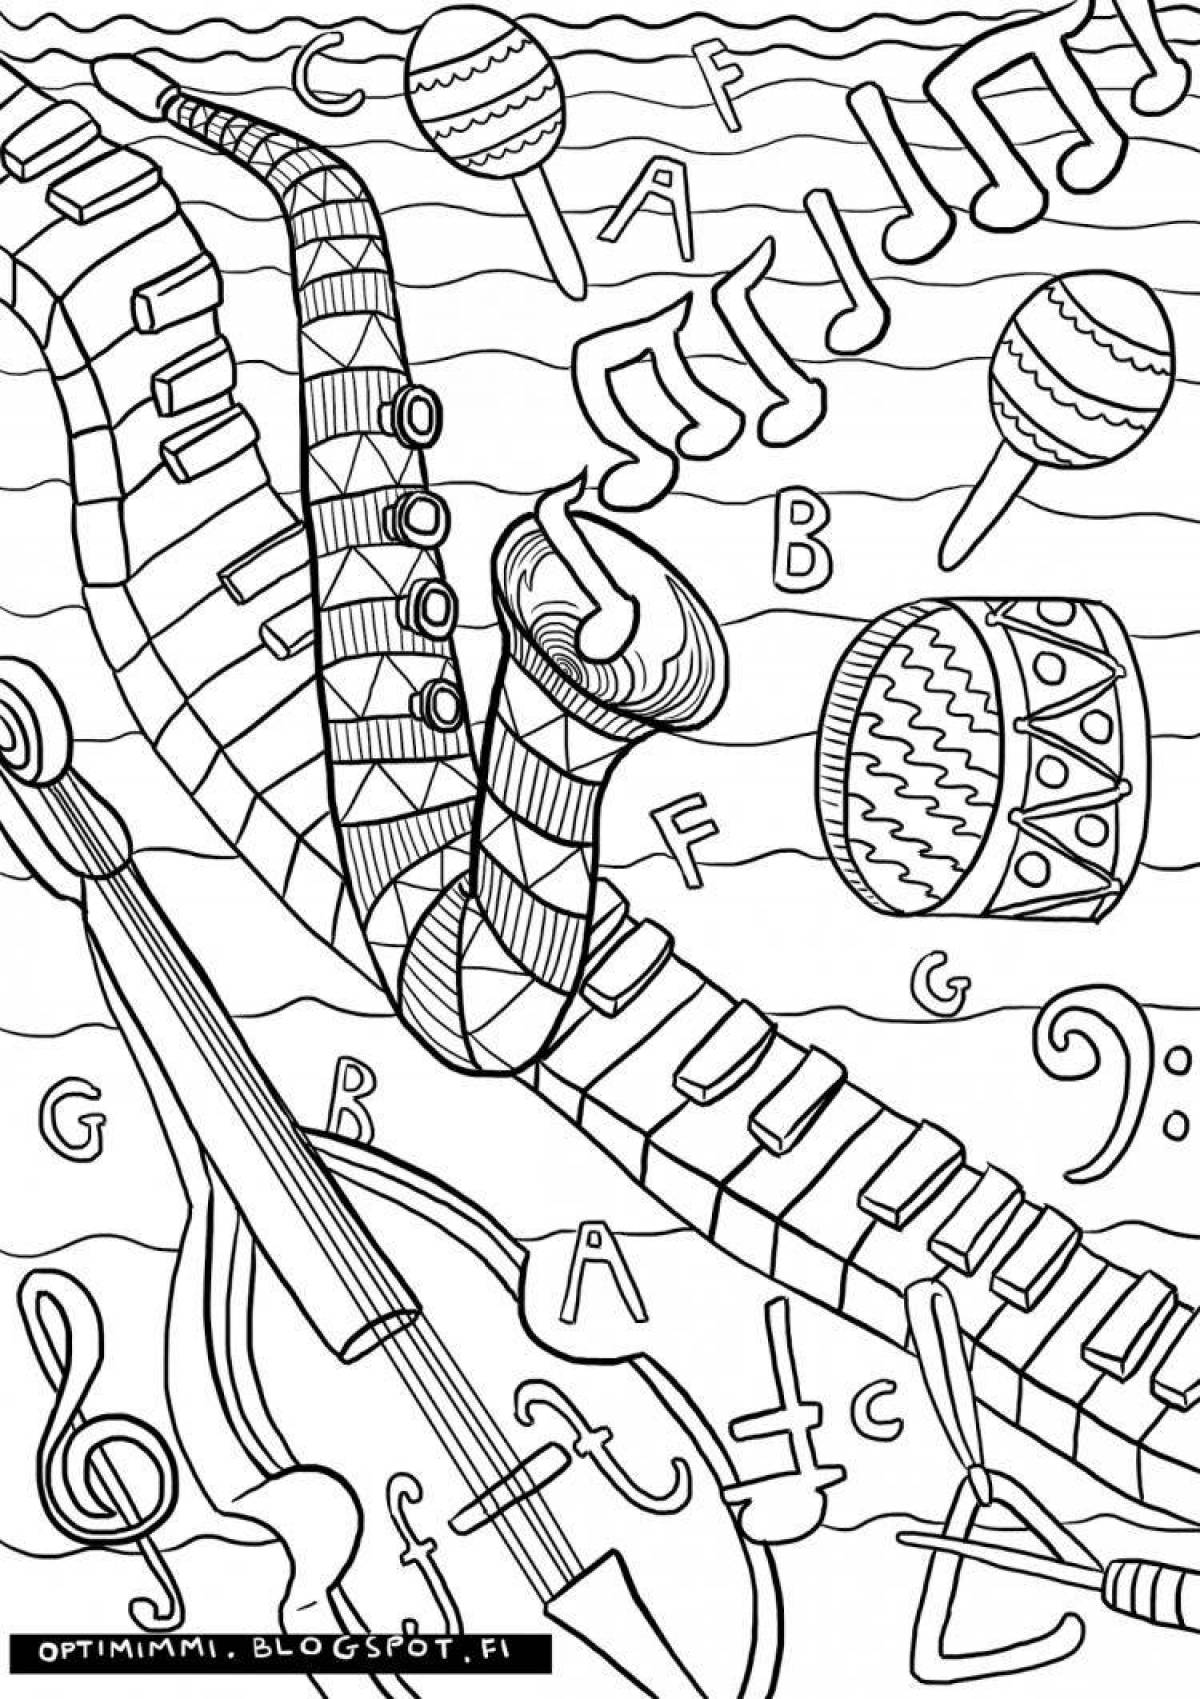 Colorful music coloring book